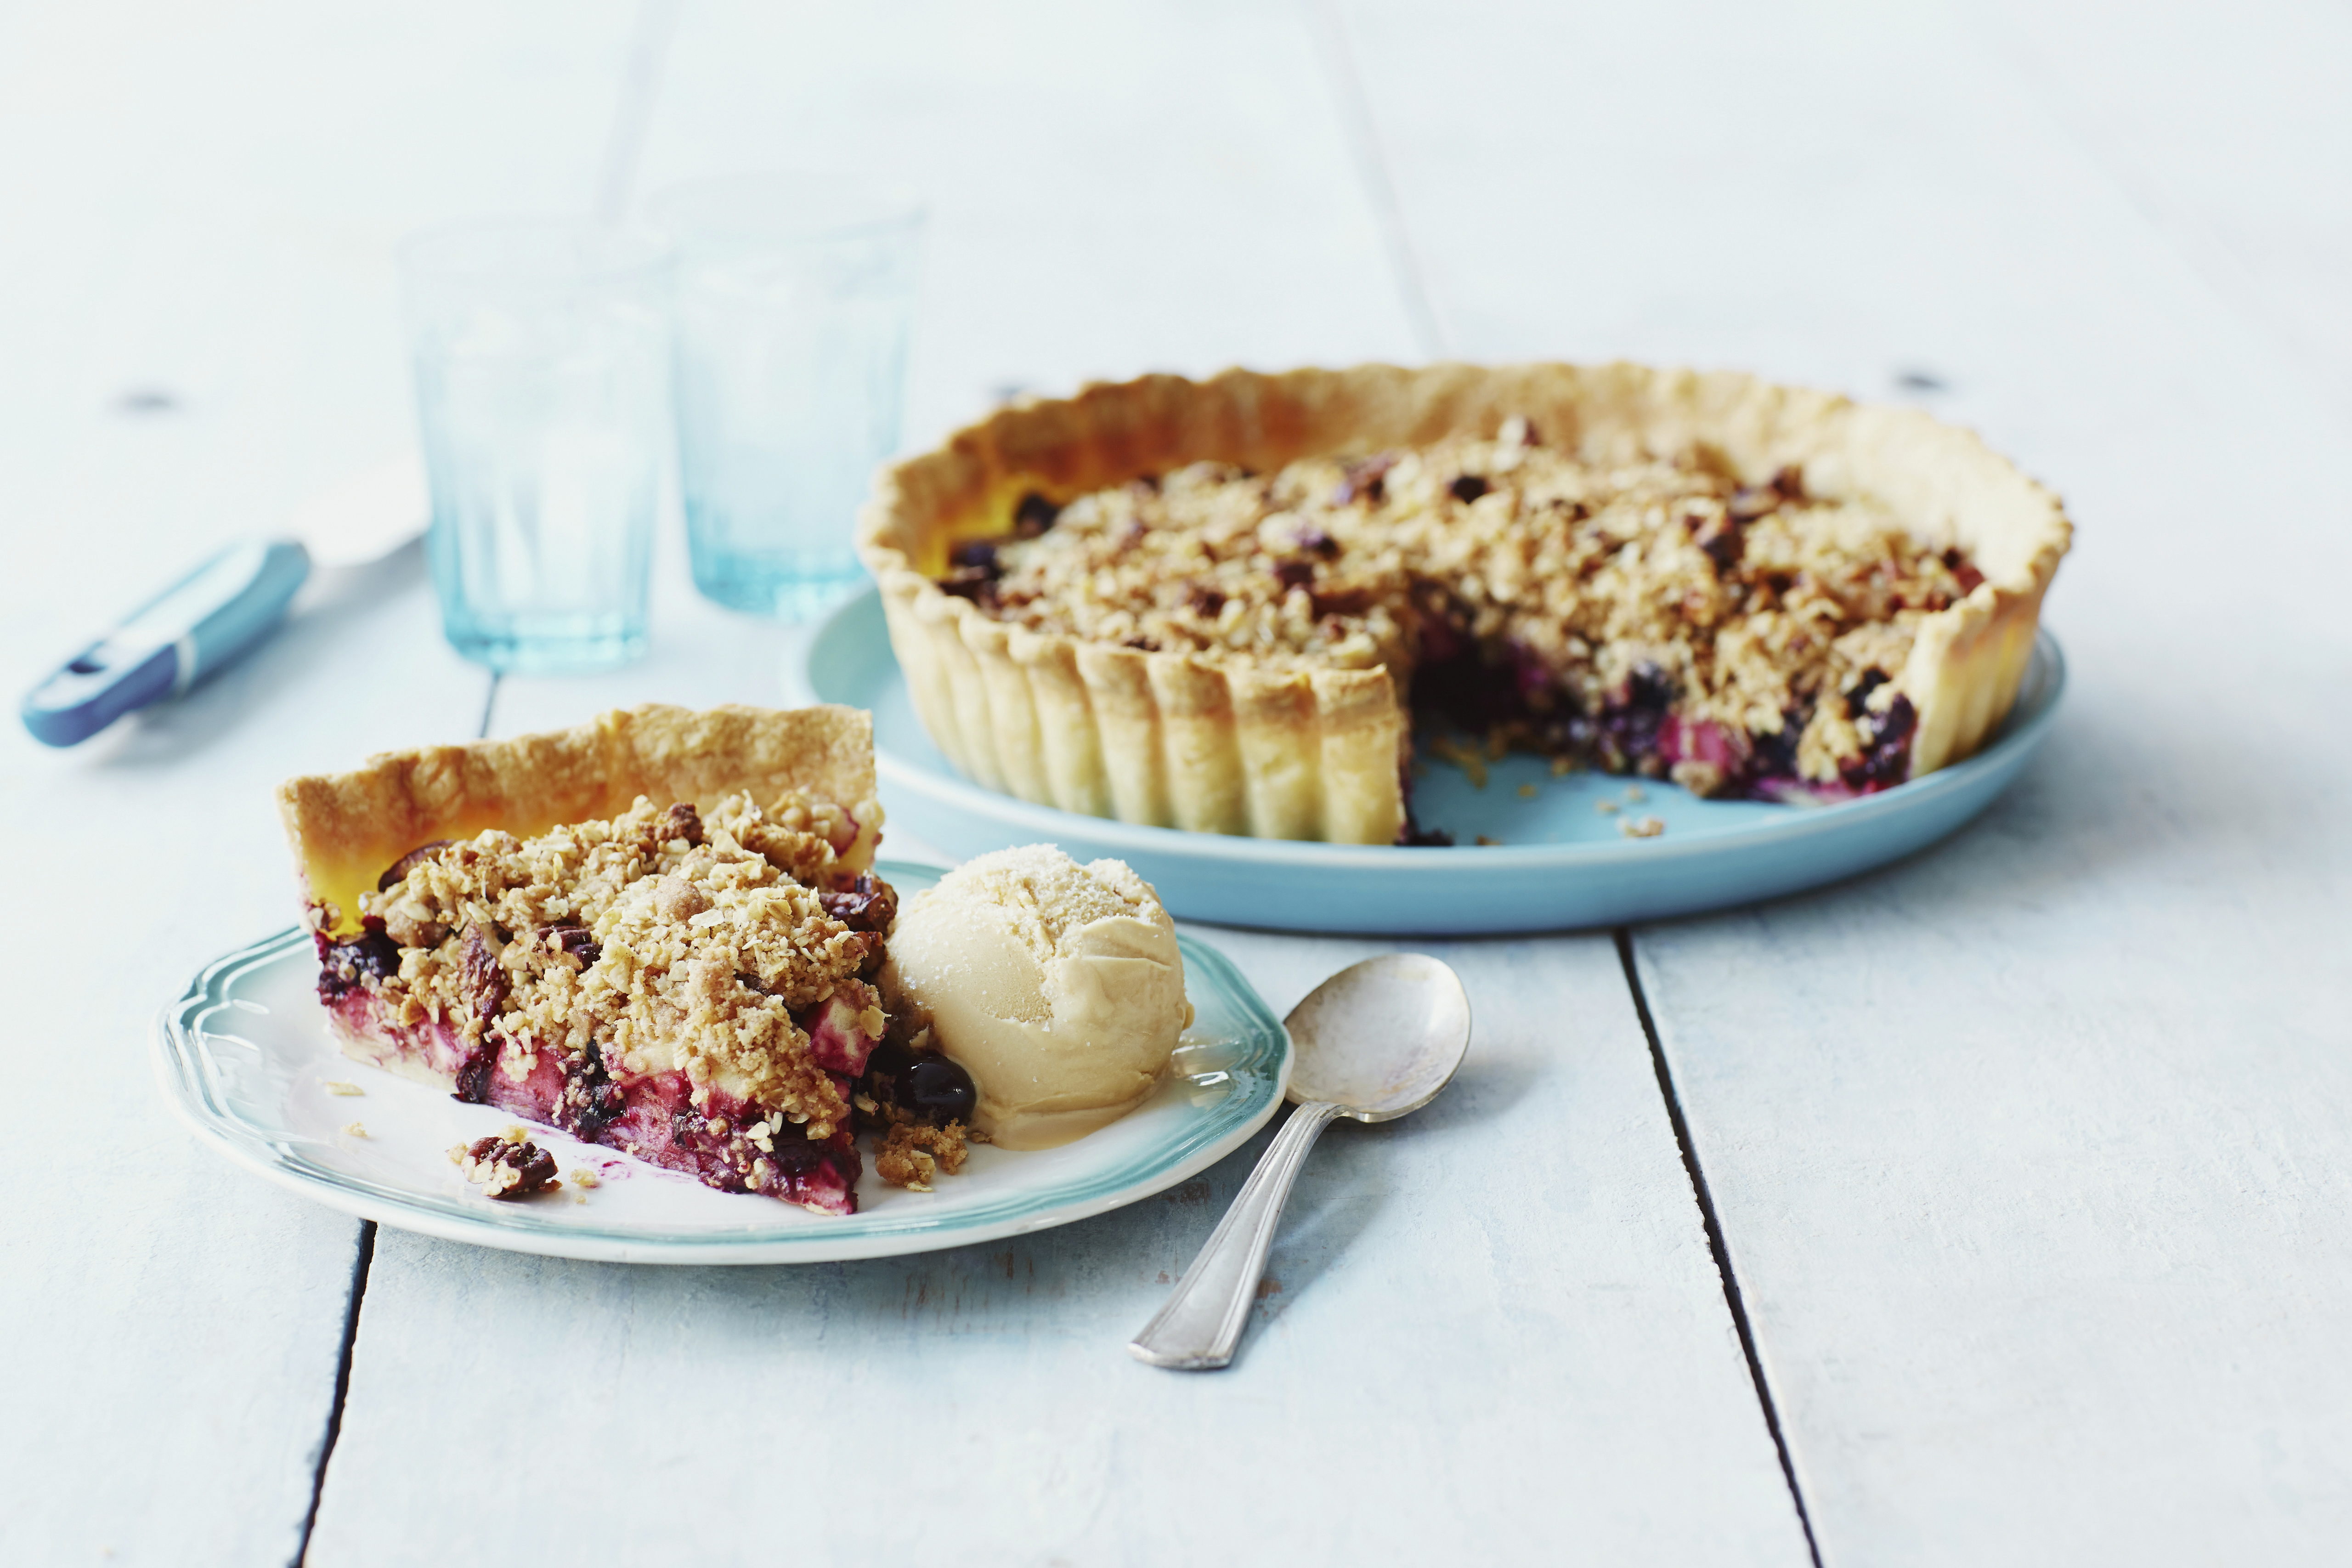 Blueberry and apple streusel-topped pie